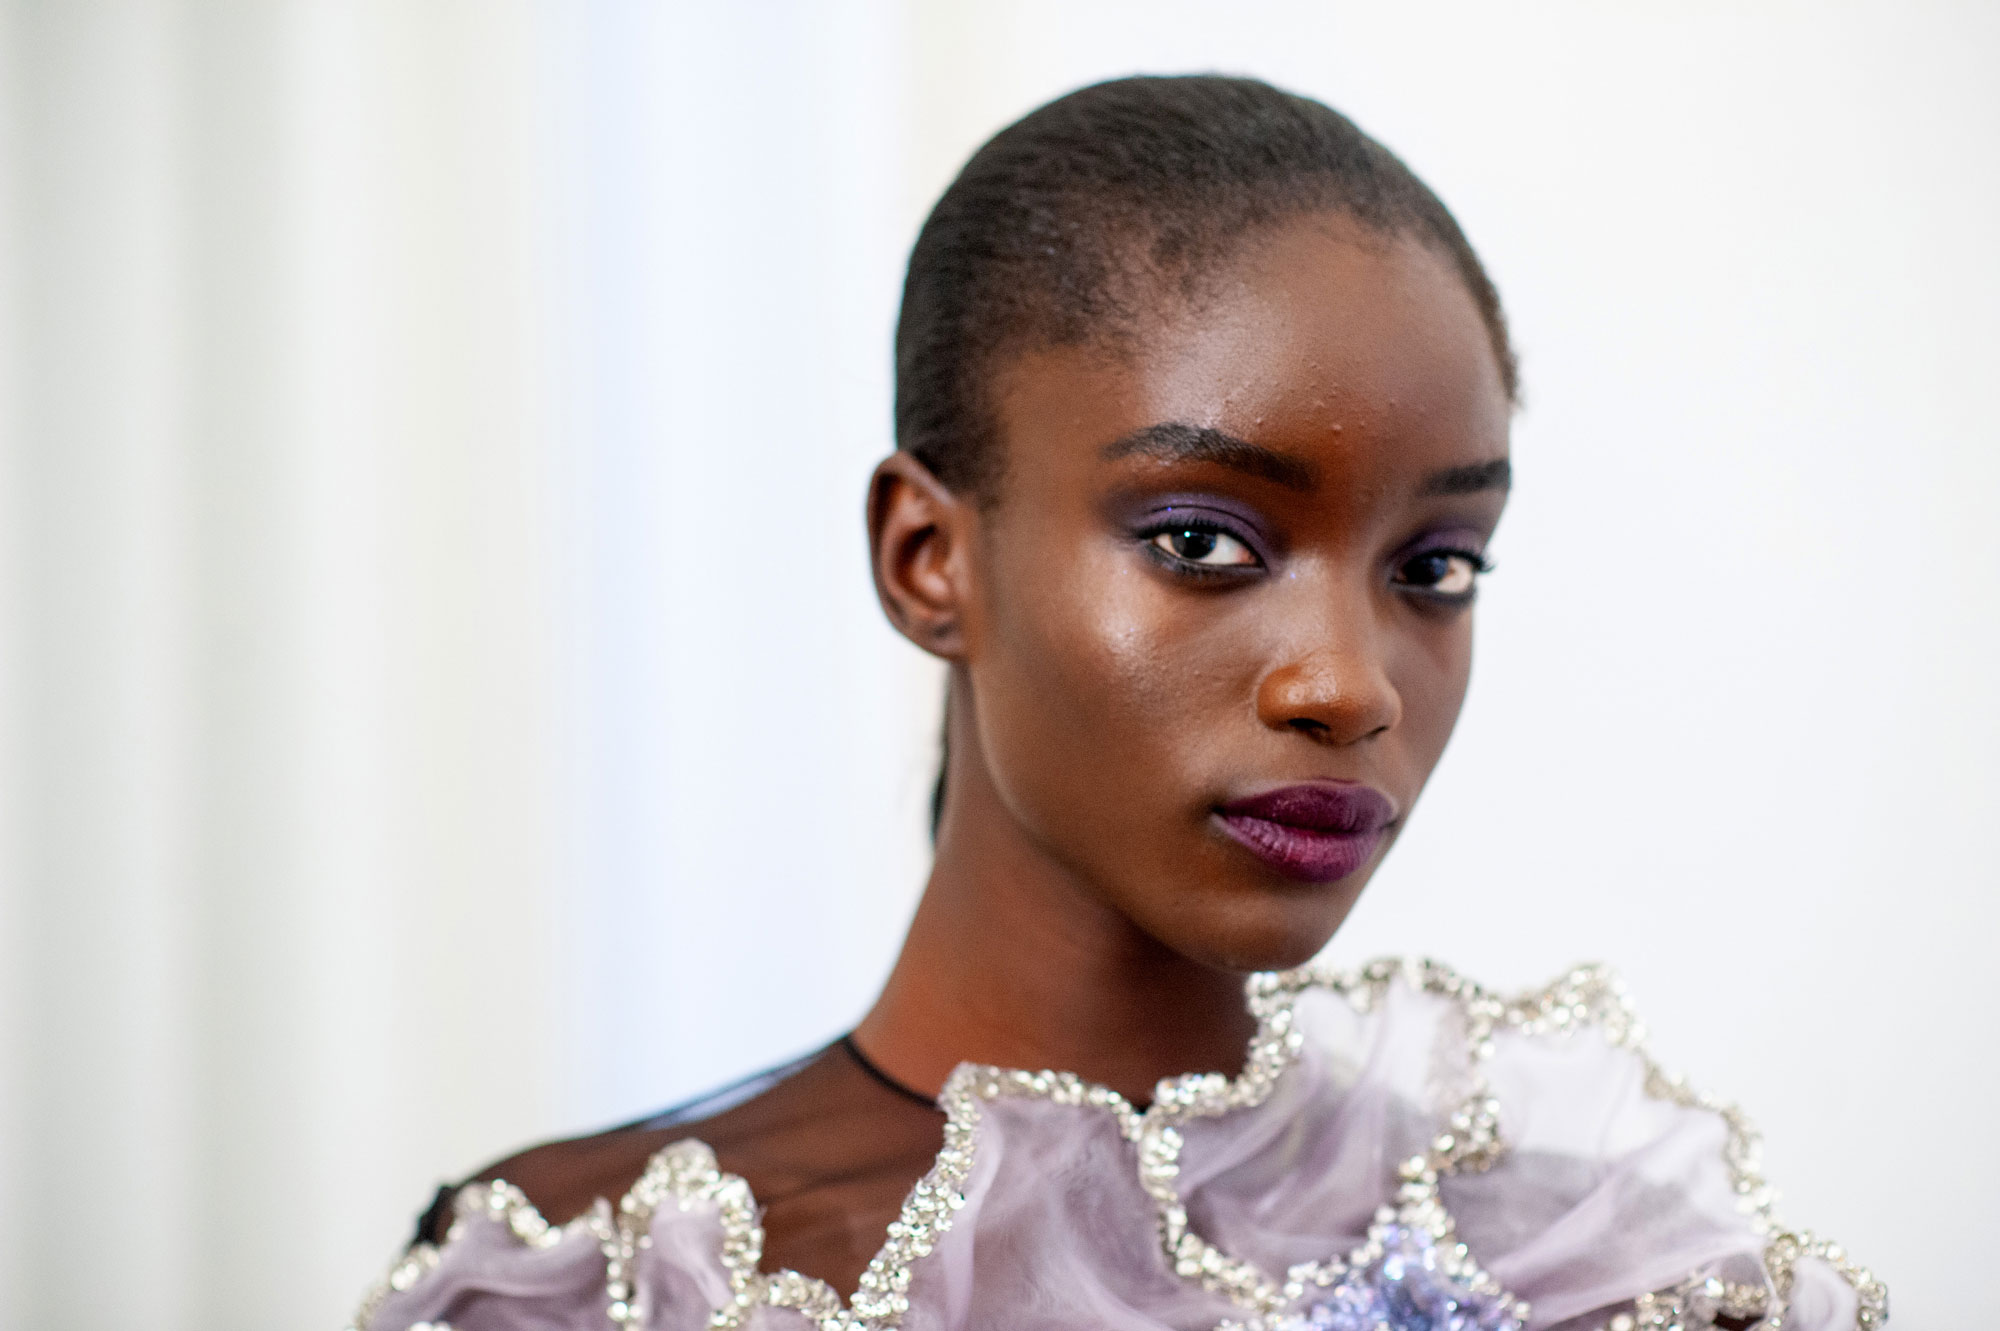 Model Maty Fall poses backstage prior to the ArdAzAei Haute Couture Fall Winter 2022 2023 show as part of Paris Fashion Week on July 07, 2022 in Paris, France